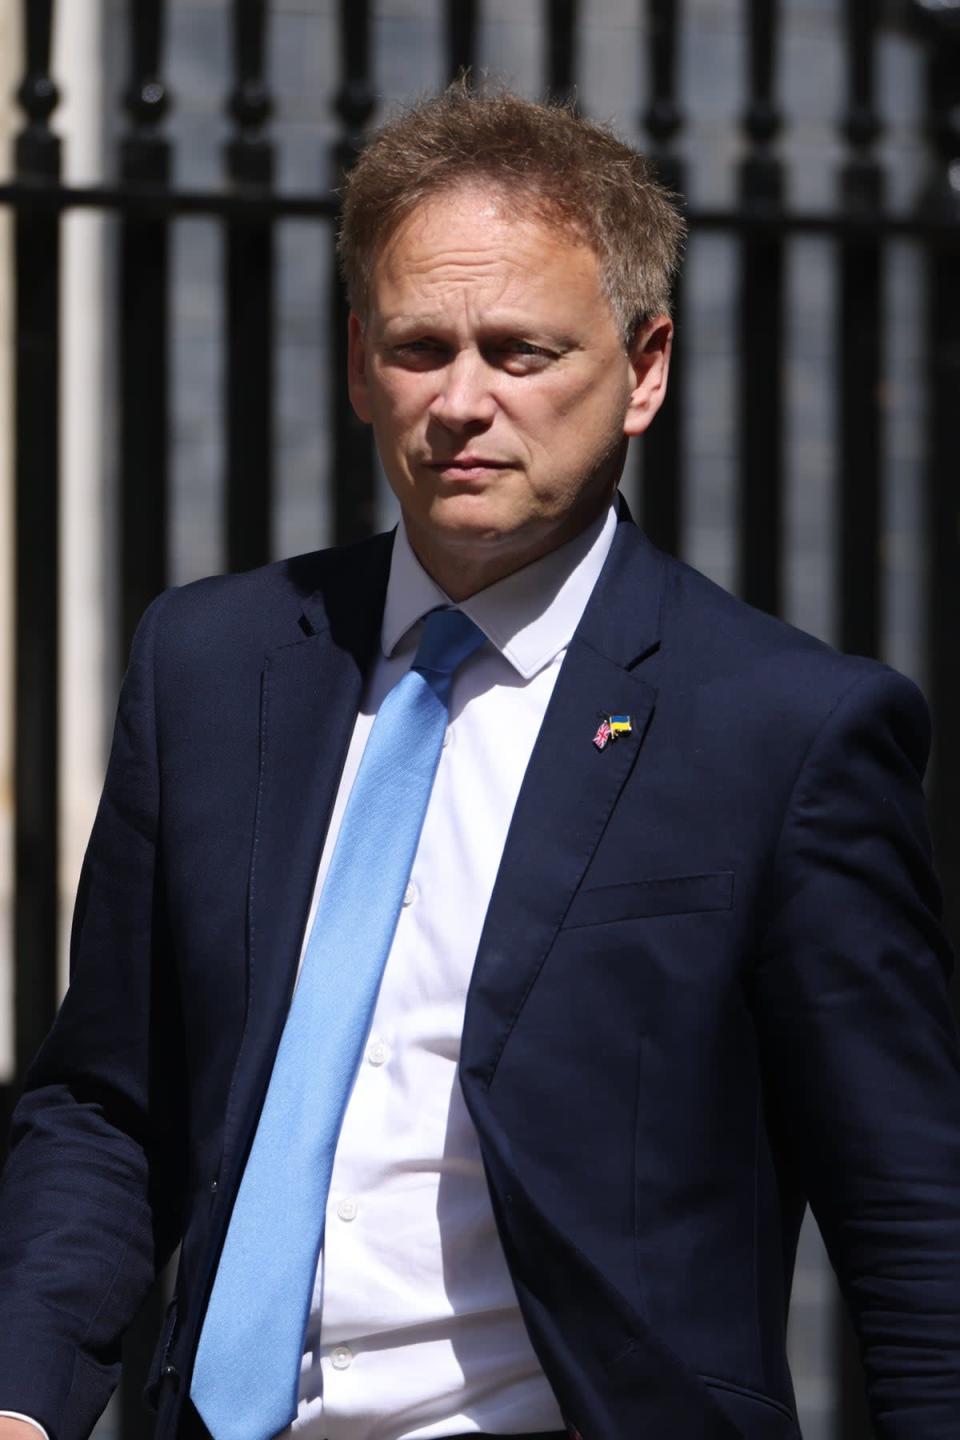 Transport Secretary Grant Shapps said tackling the cost-of-living crisis and strengthening the economy are top of his agenda (PA) (PA Wire)